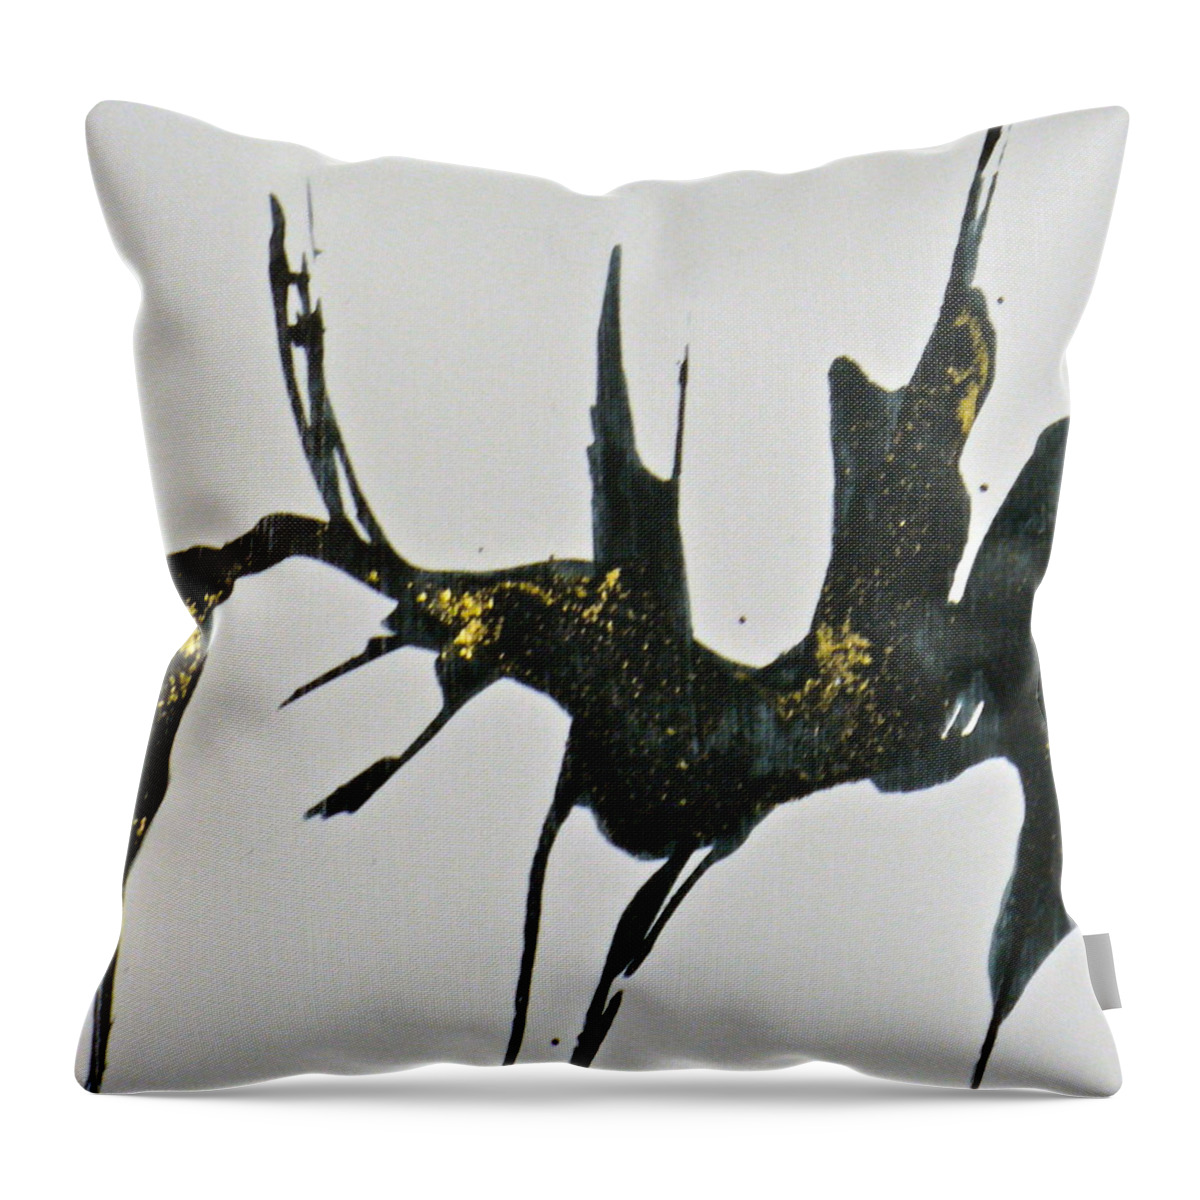 Fine Art Throw Pillow featuring the painting Shift by Mary Sullivan